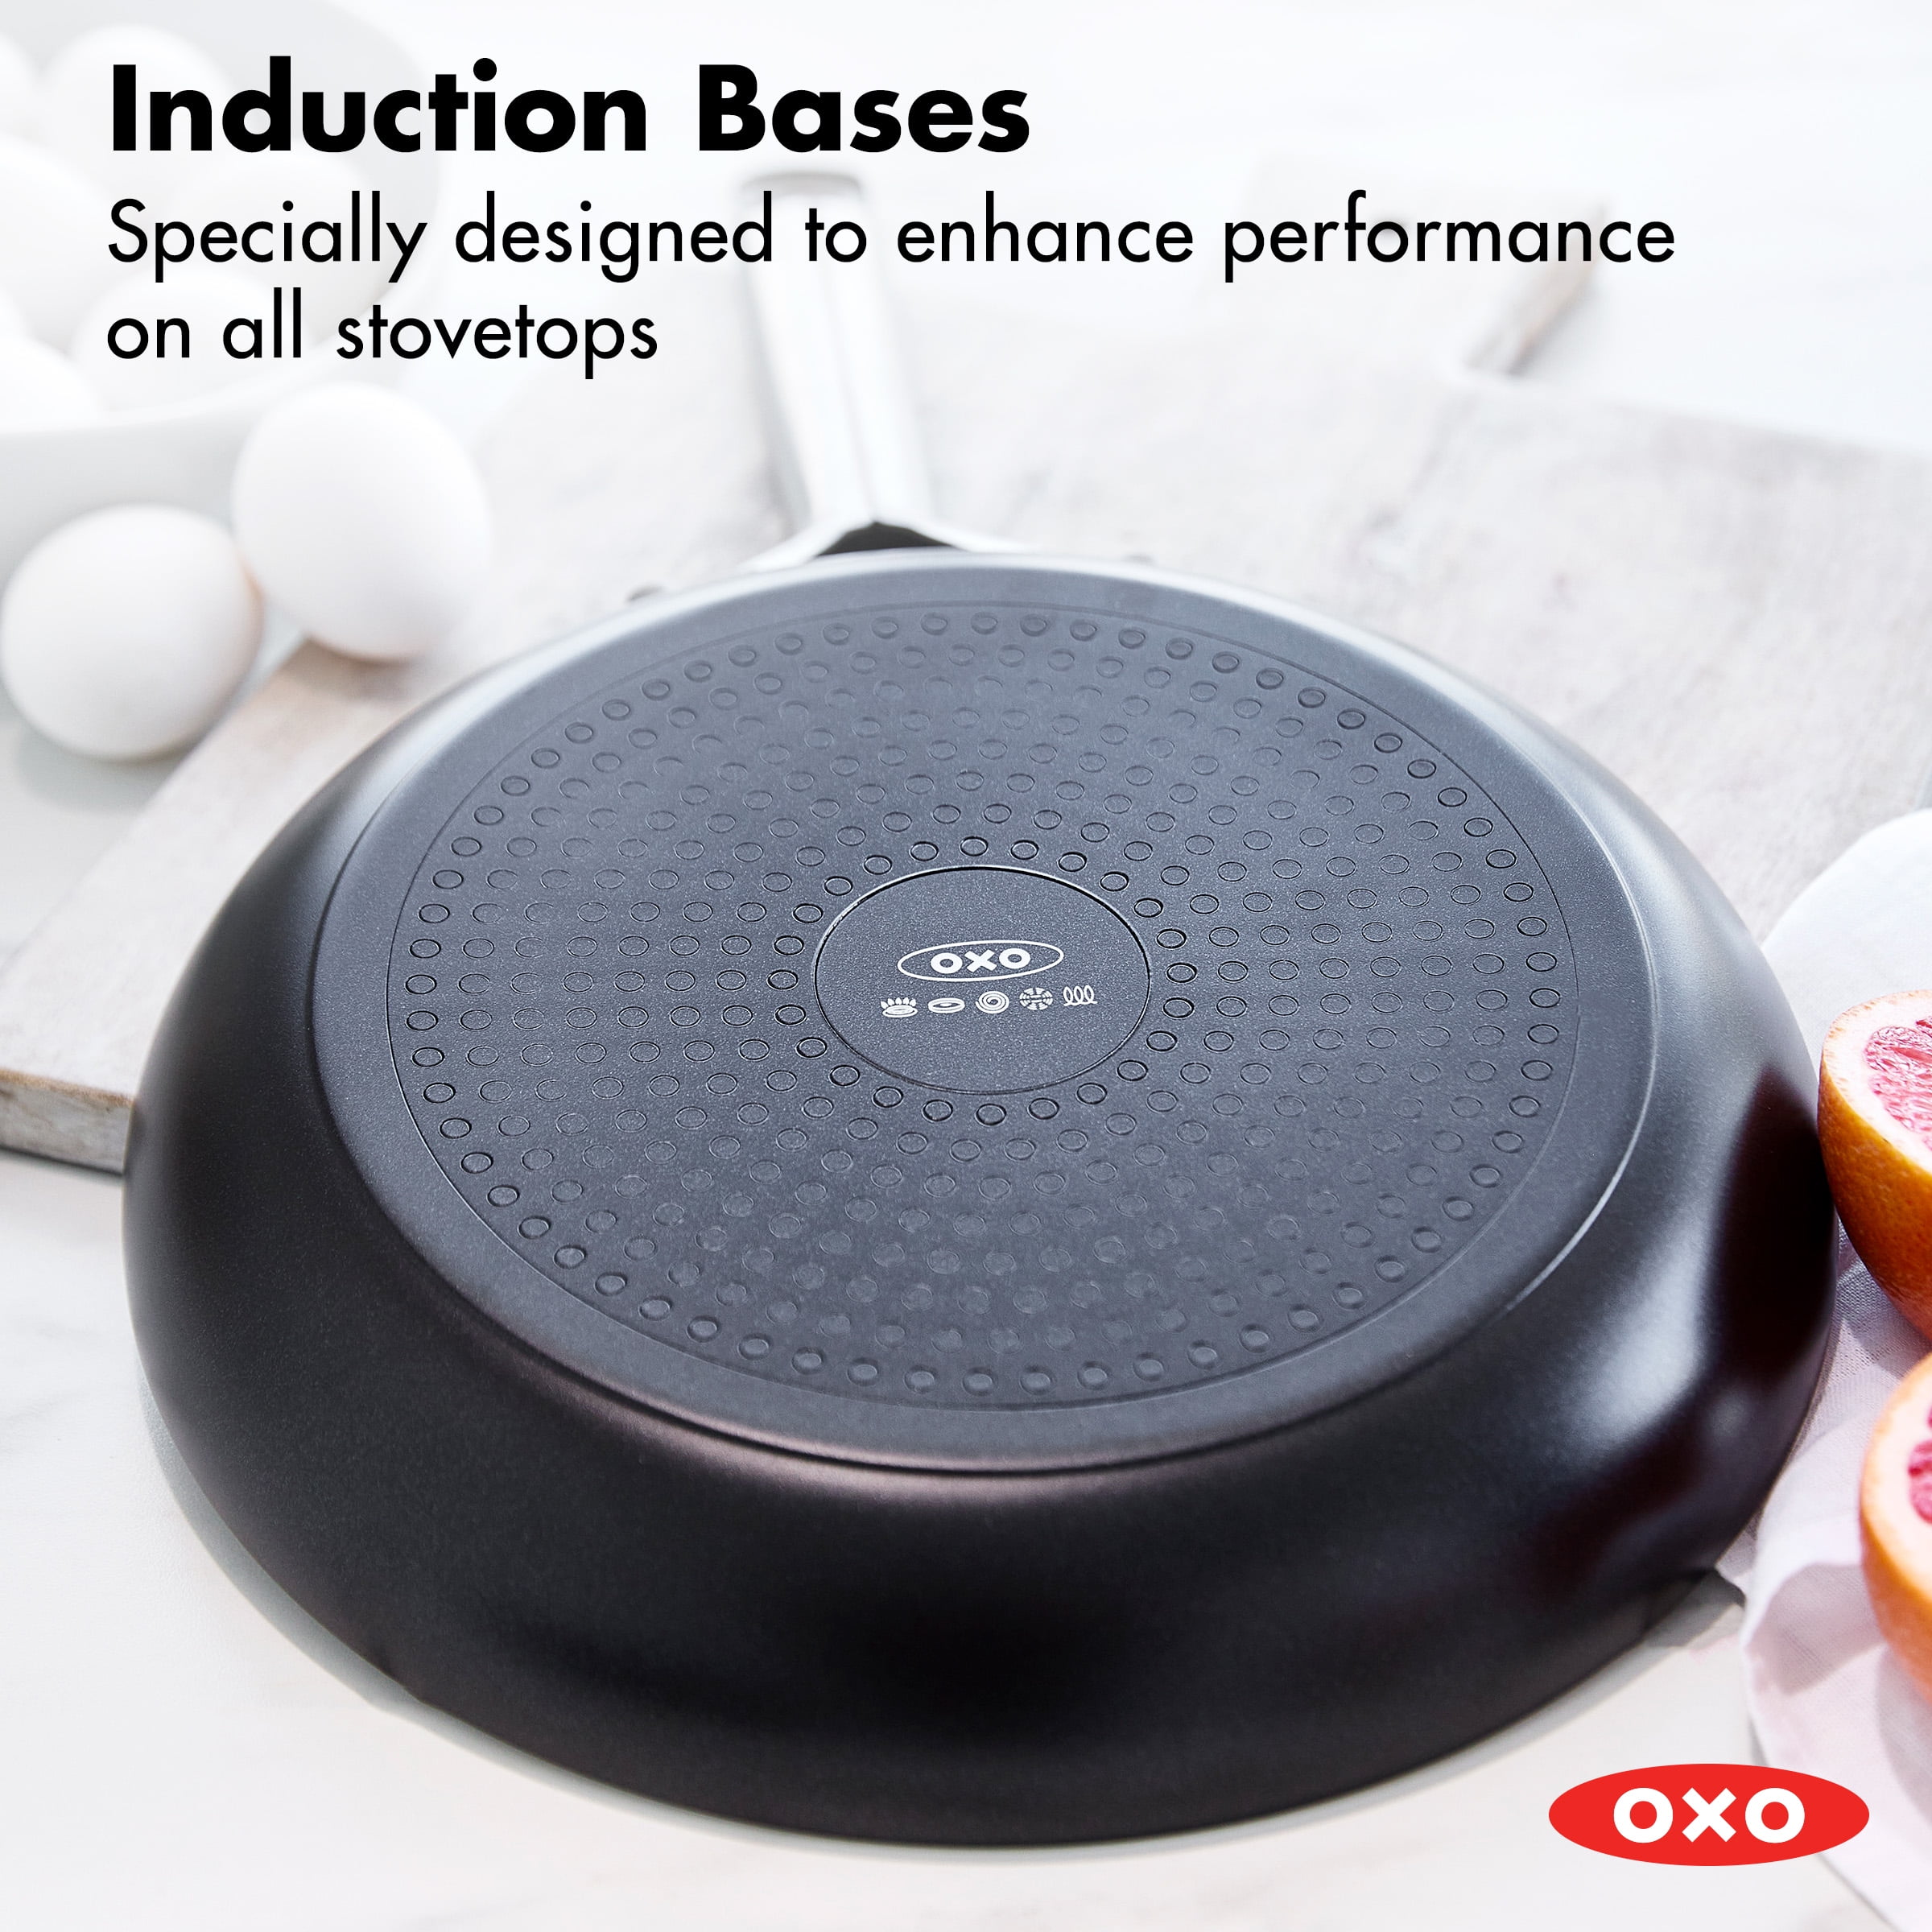 This OXO Nonstick Skillet Is Just $22 at